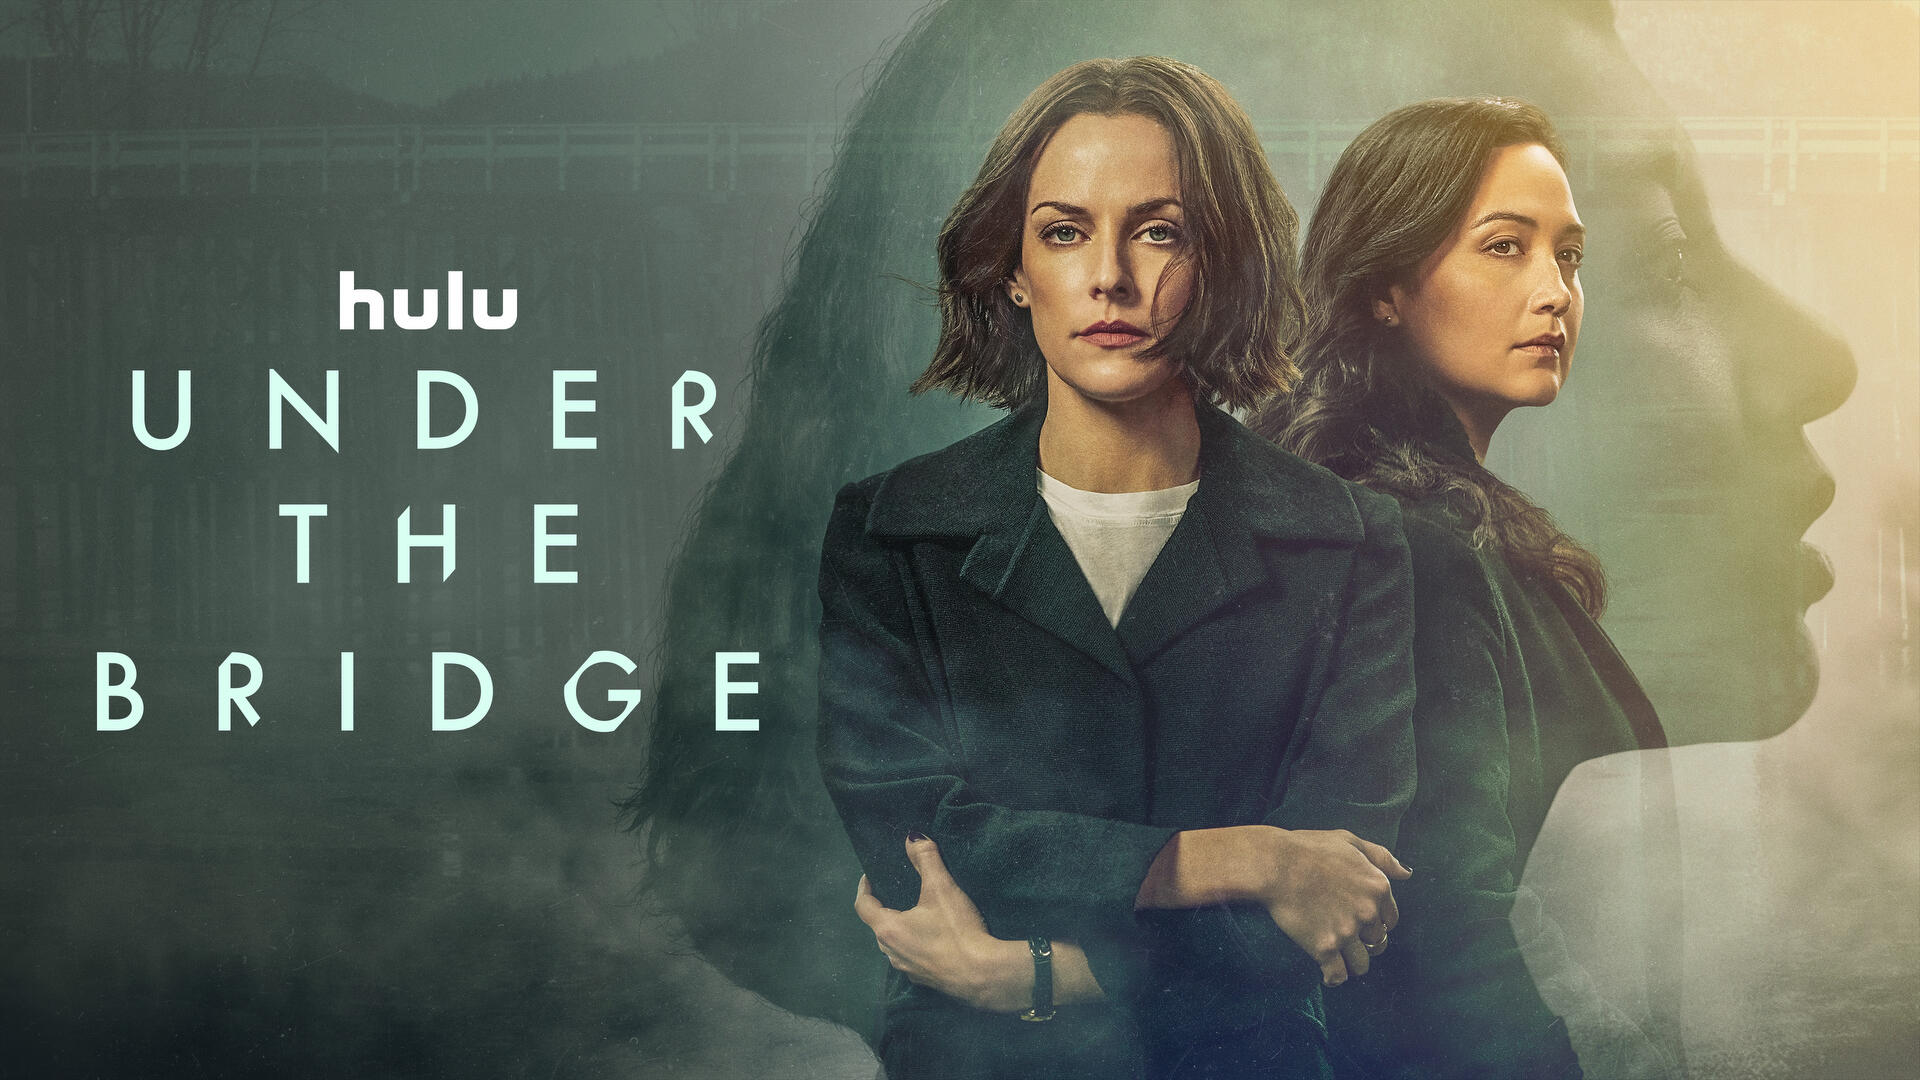 Under the Bridge -- Season 1 -- “Under the Bridge” is based on acclaimed author Rebecca Godfrey’s book about the 1997 true story of fourteen-year old Reena Virk (Vritika Gupta) who went to join friends at a party and never returned home. Through the eyes of Godfrey (Riley Keough) and a local police officer (Lily Gladstone), the series takes us into the hidden world of the young girls accused of the murder — revealing startling truths about the unlikely killer. (Courtesy of Disney)